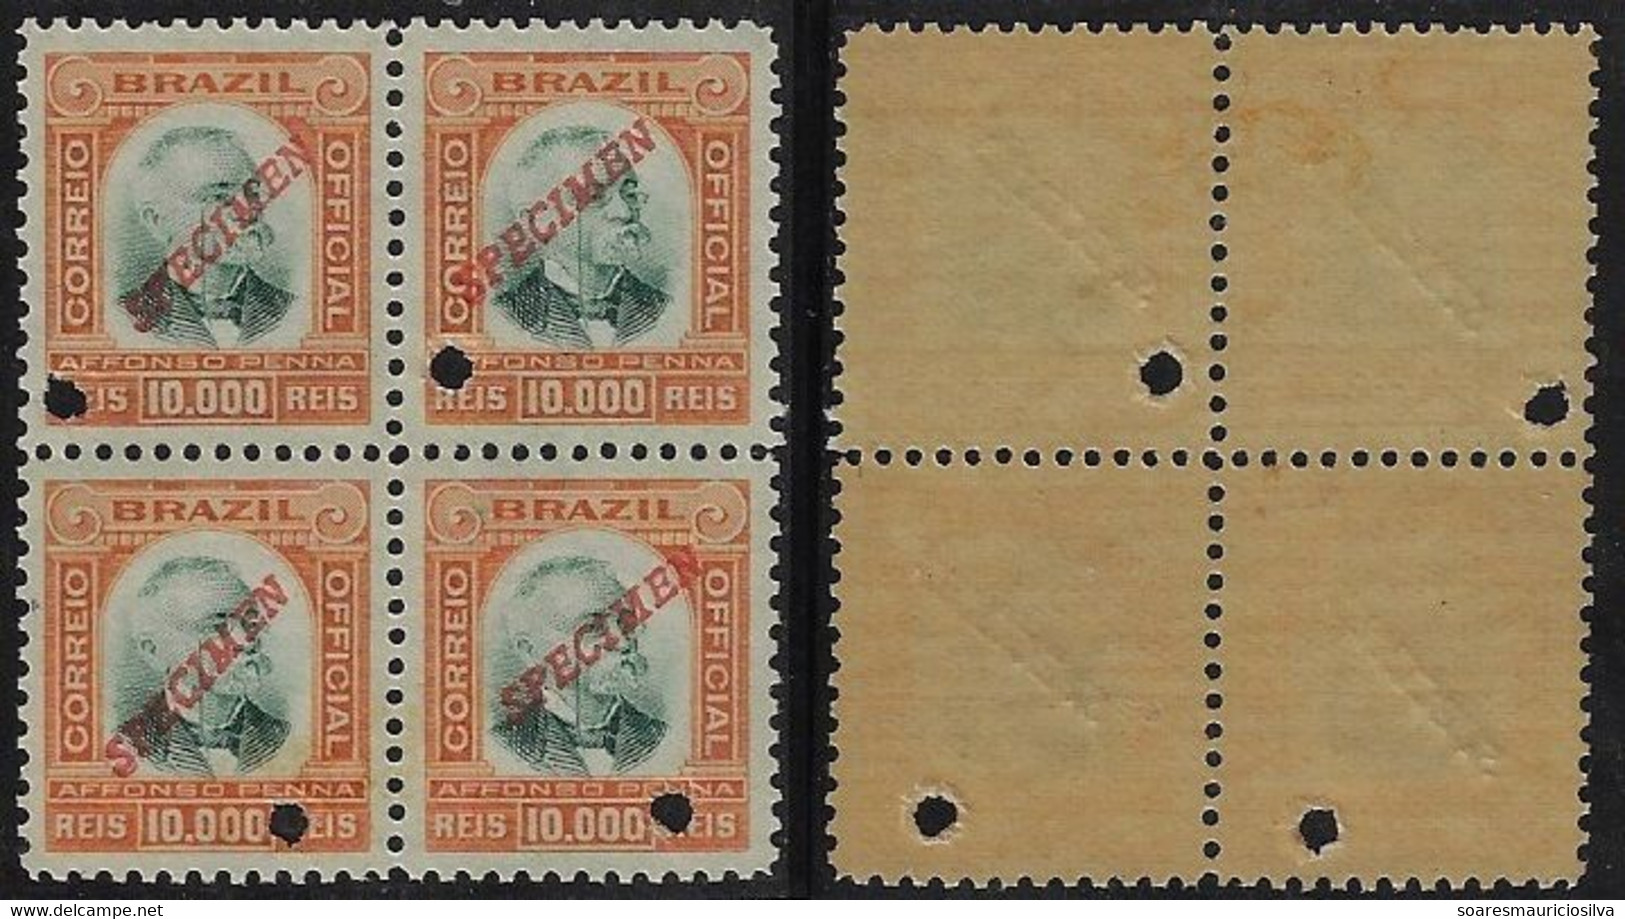 Brazil 1906 RHM-Official-13 President Afonso Pena 10,000 Réis Block Of 4 Stamp With Hole And Overprint Specimen Unused - Oficiales